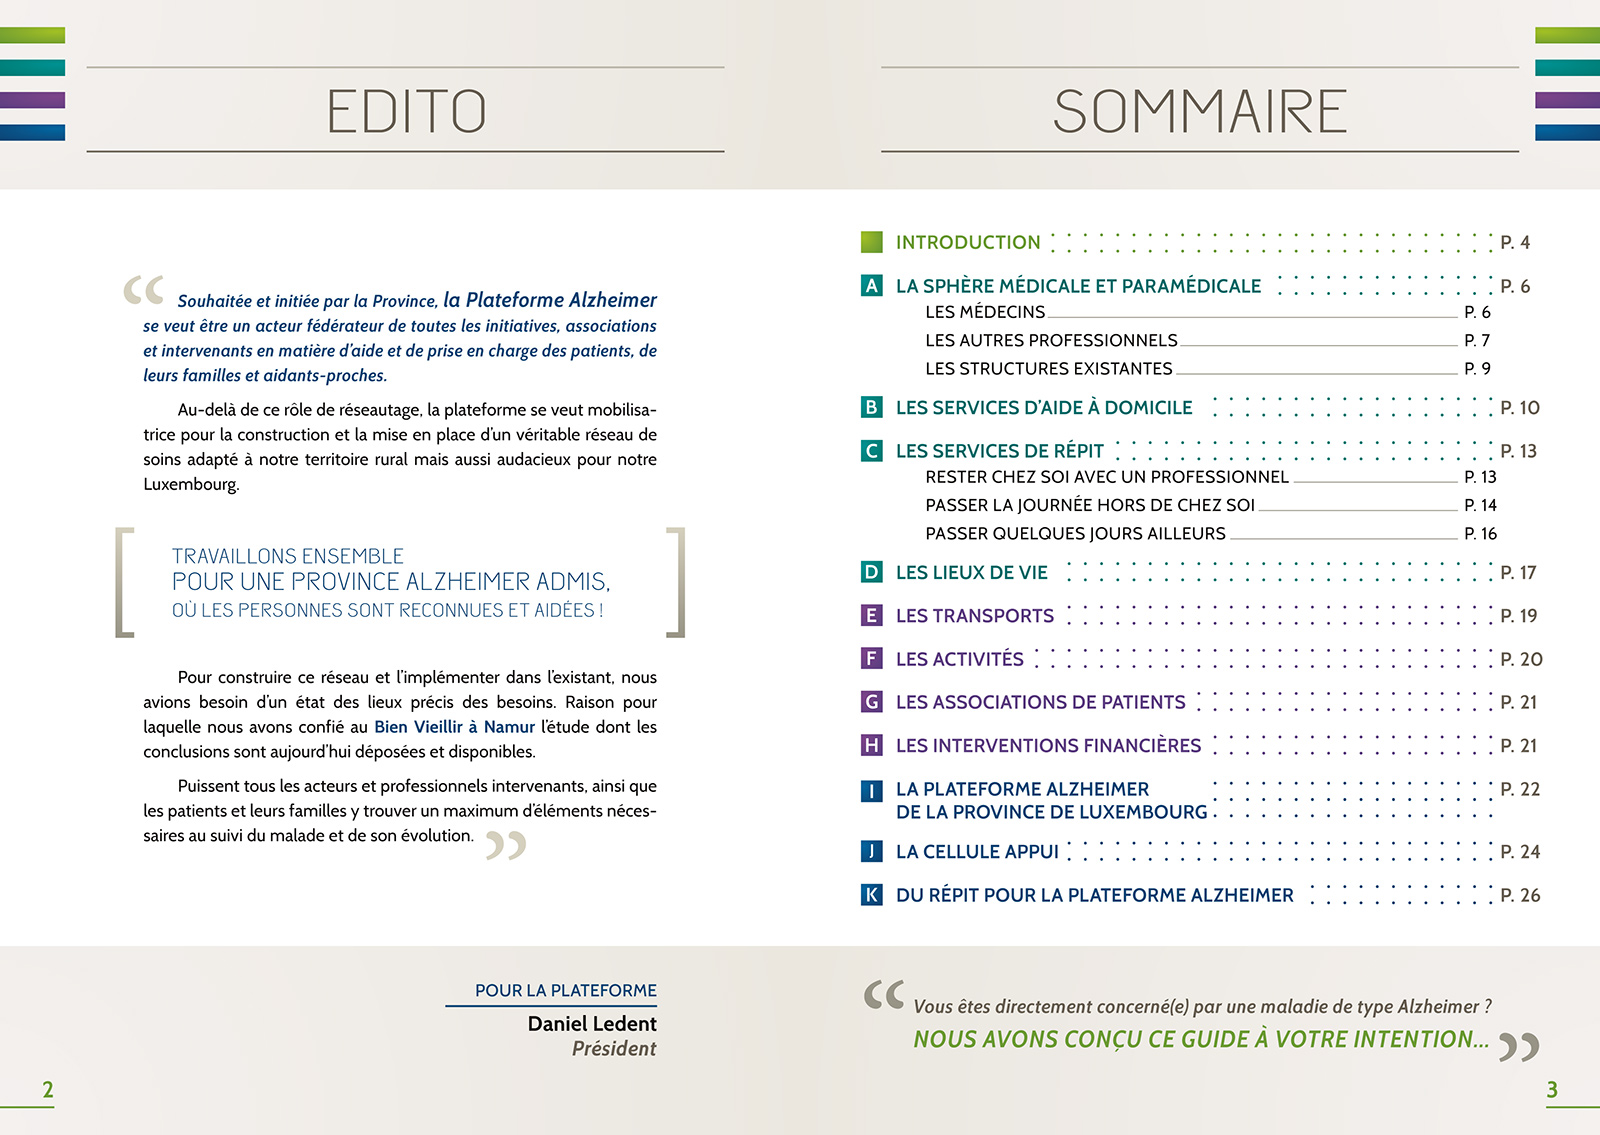 Edito and Summary of brochure about Alzheimer's disease